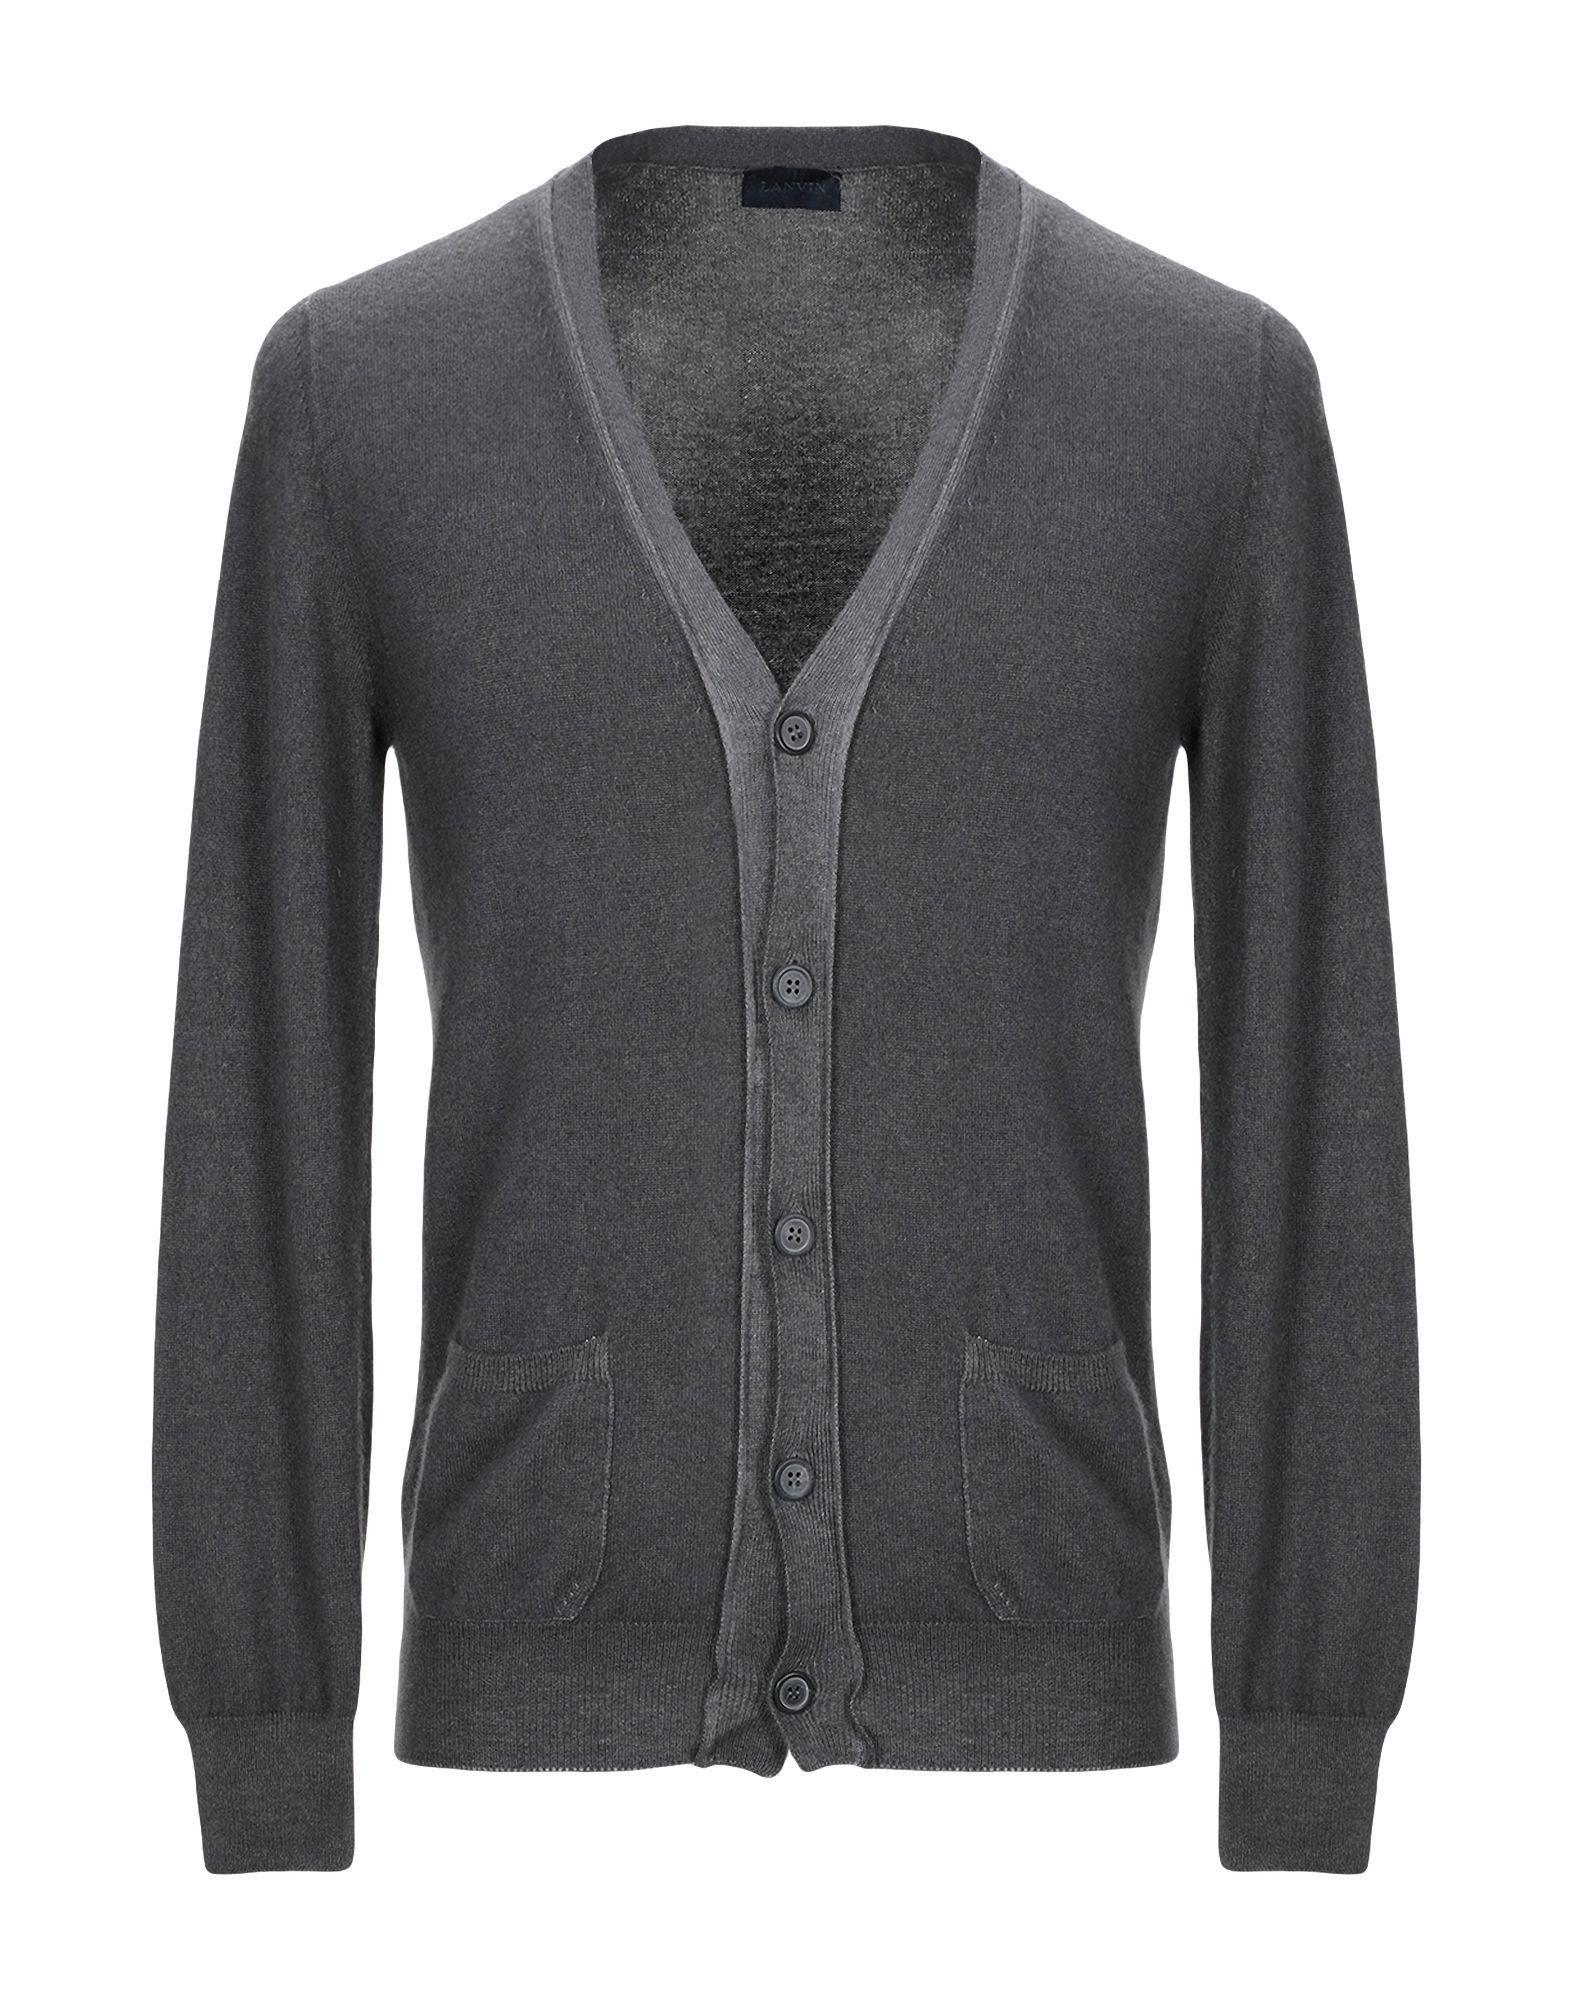 Lanvin Cashmere Cardigan in Lead (Gray) for Men - Lyst